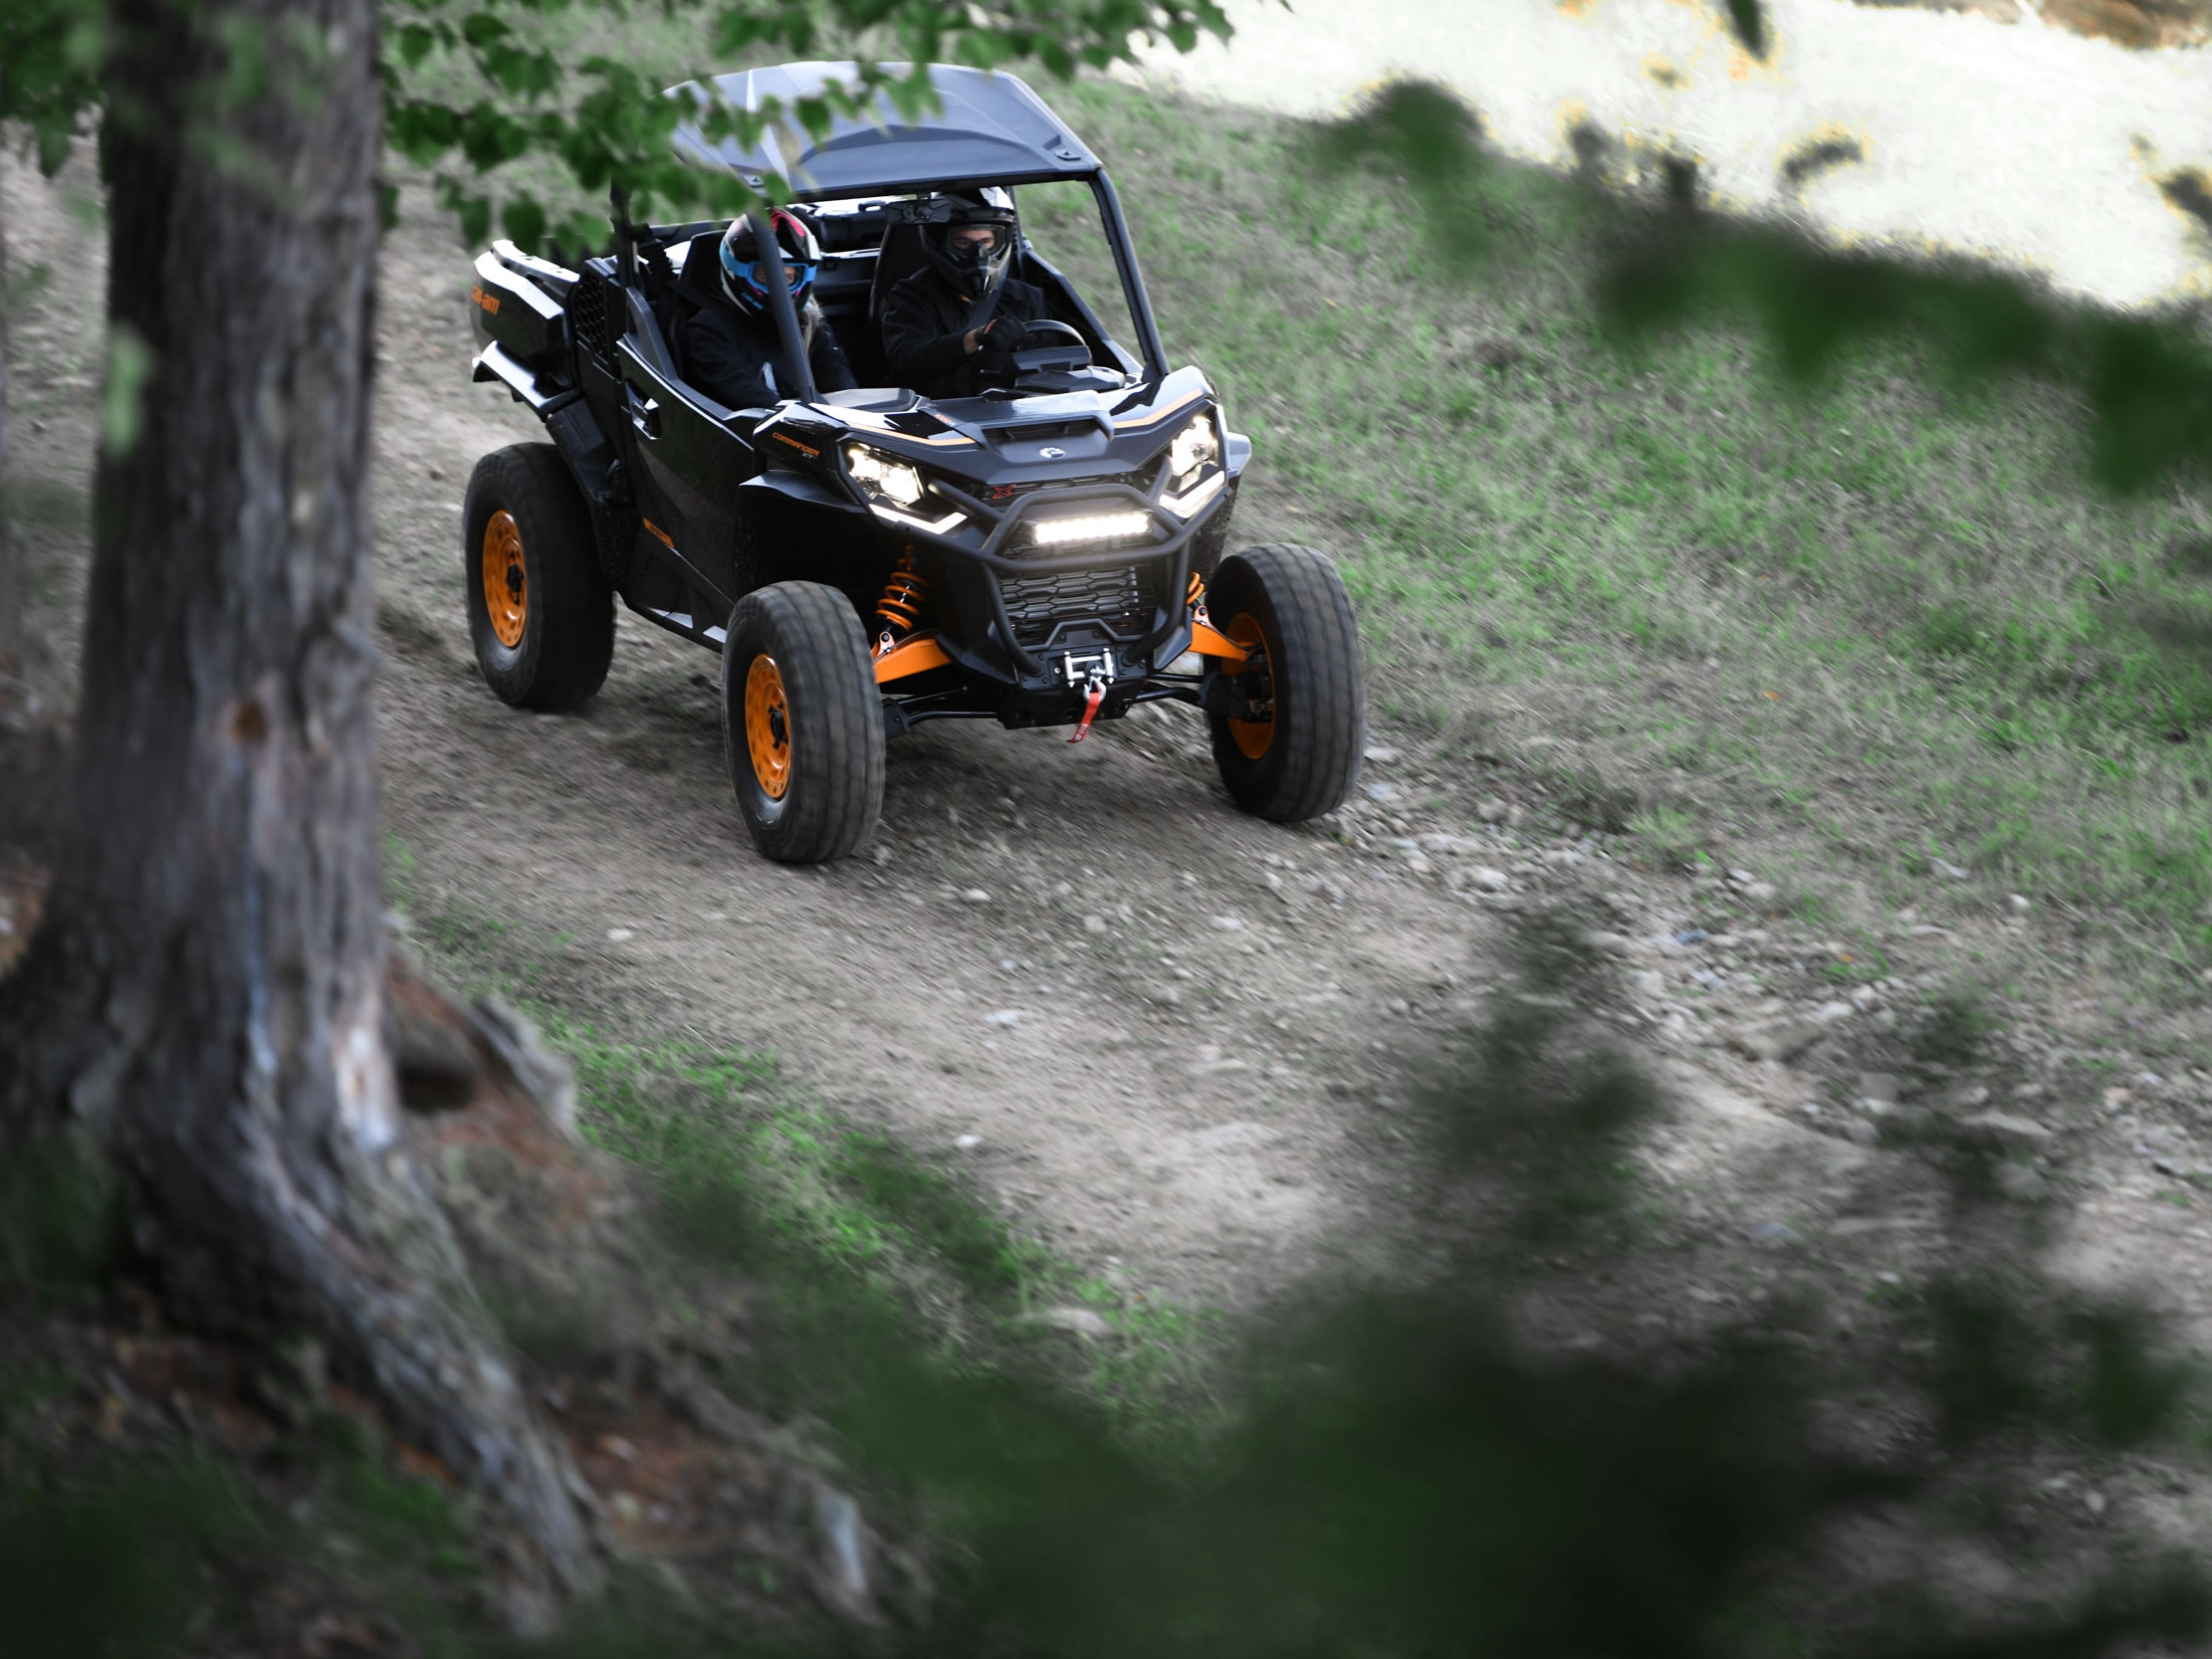 Take the lead on your powersport Can-Am UTV, in Dubois, WY